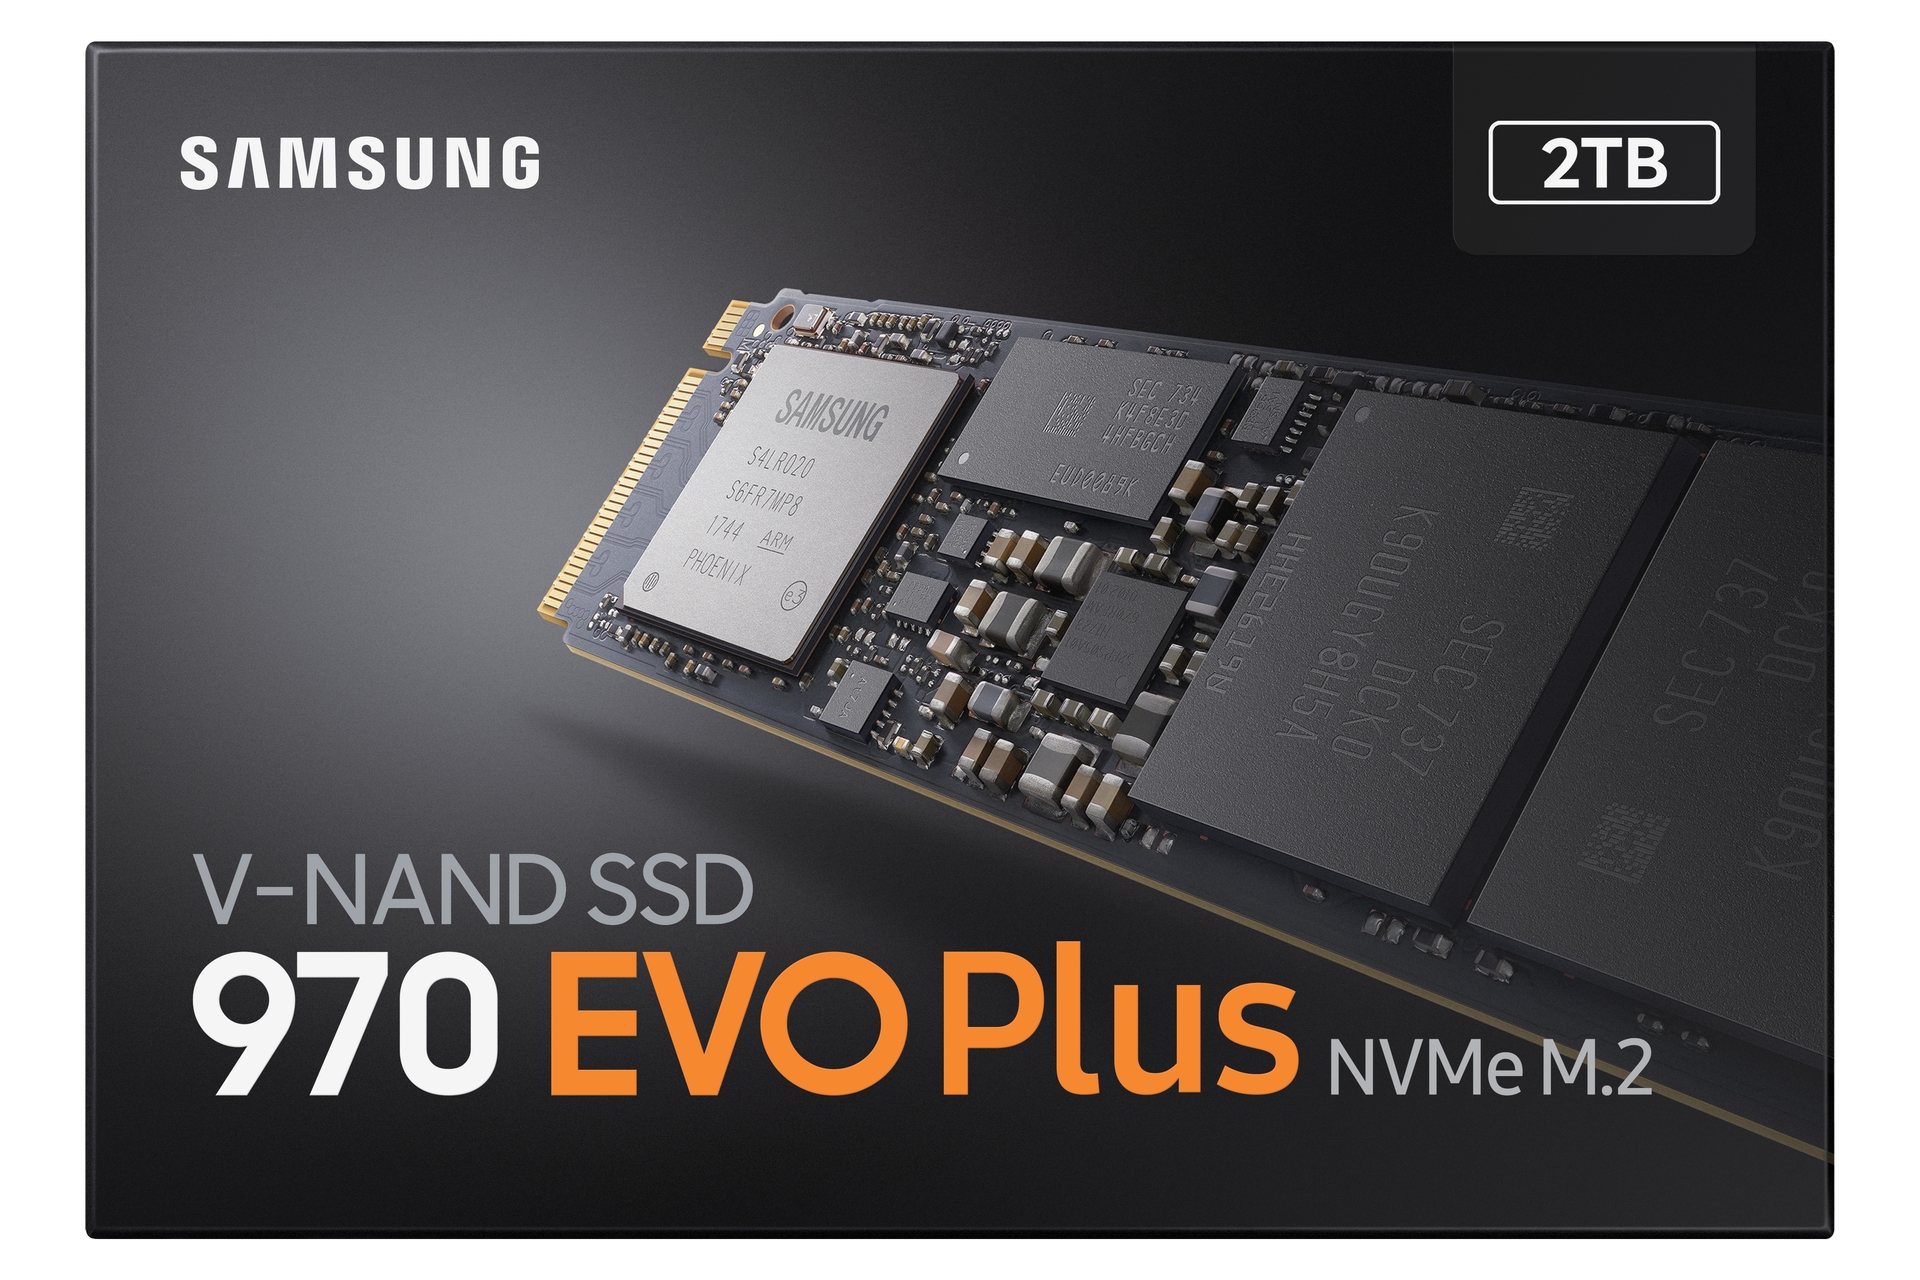 Samsung 970 EVO Plus SSD 2TB - M.2 NVMe Interface Internal Solid State Drive with V-NAND Technology (MZ-V7S2T0B/AM)